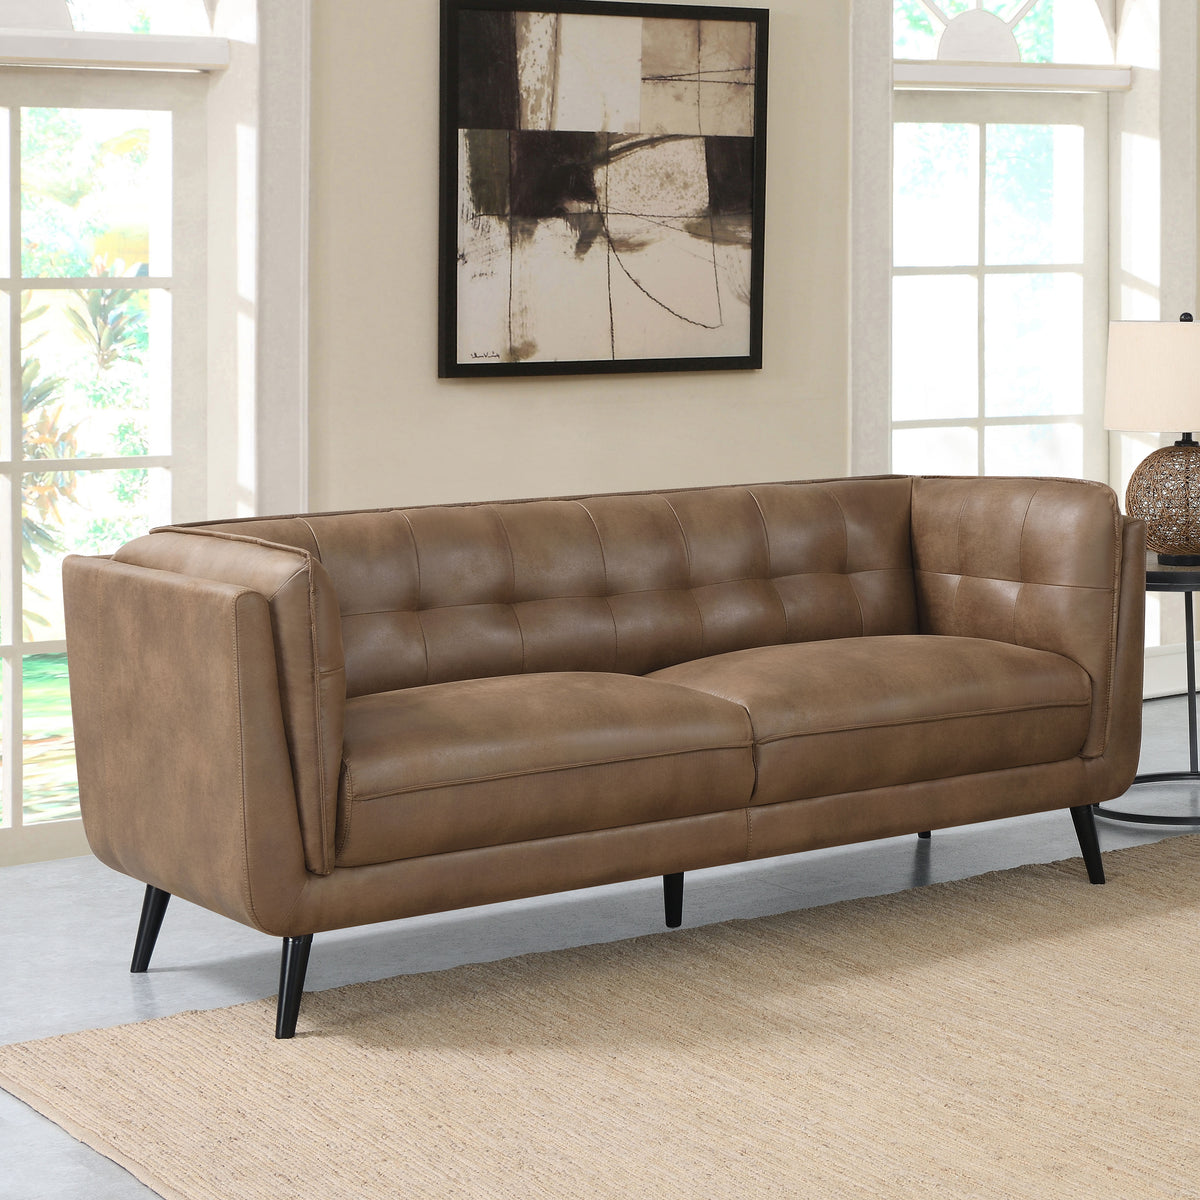 Thatcher Upholstered Button Tufted Sofa Brown Thatcher Upholstered Button Tufted Sofa Brown Half Price Furniture